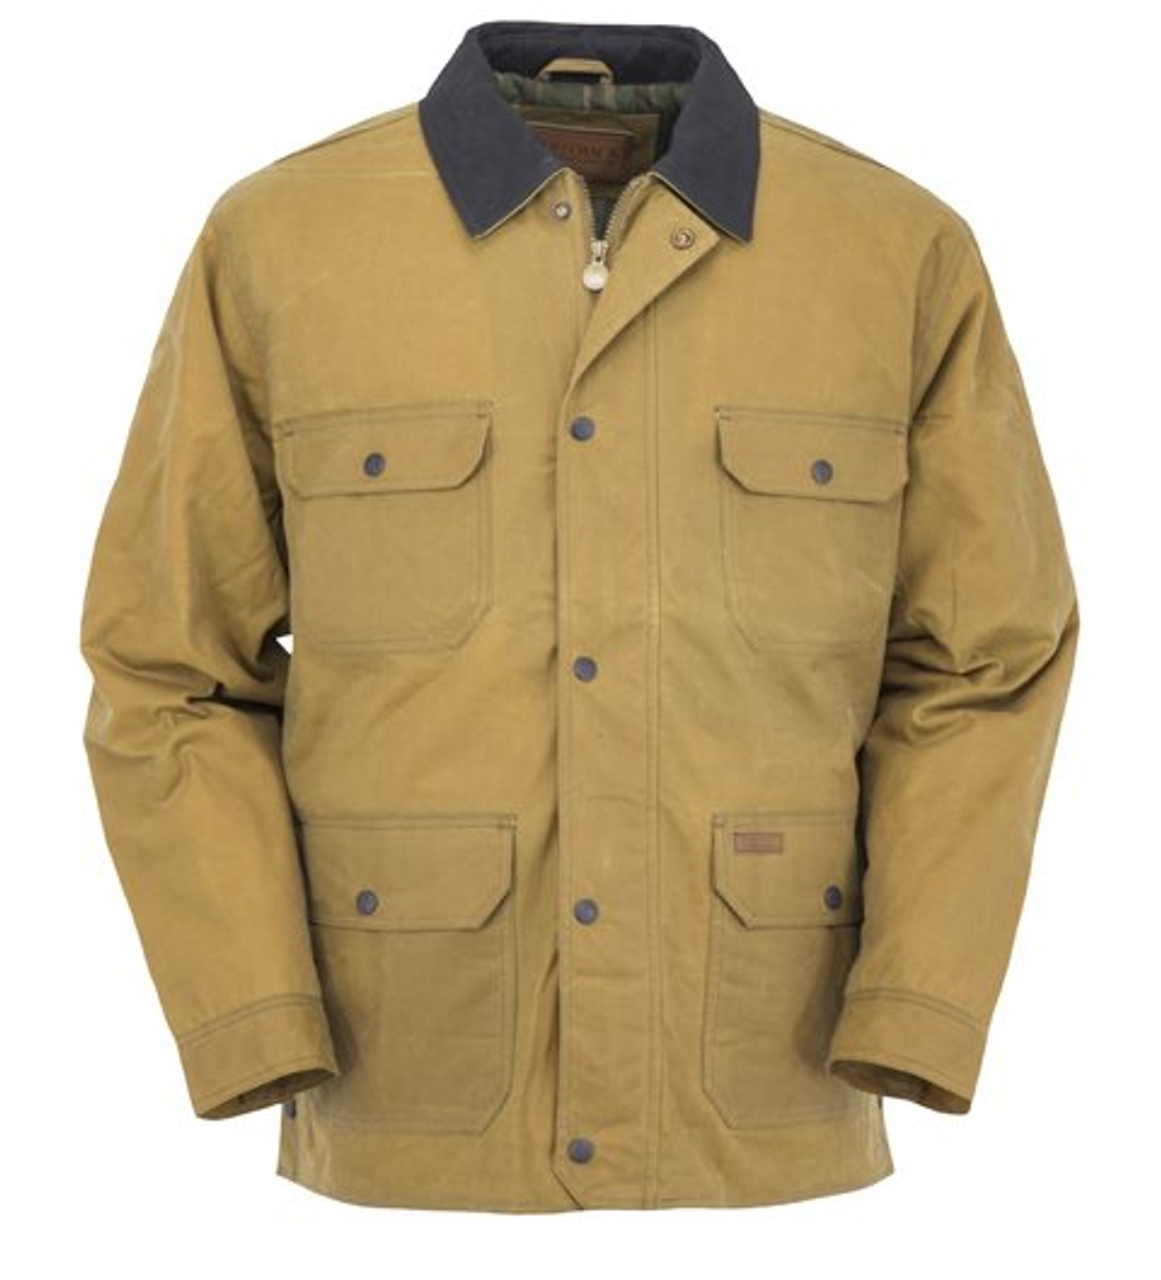 Men's Outback Trading Gidley Oilskin Jacket - Herbert's Boots and ...